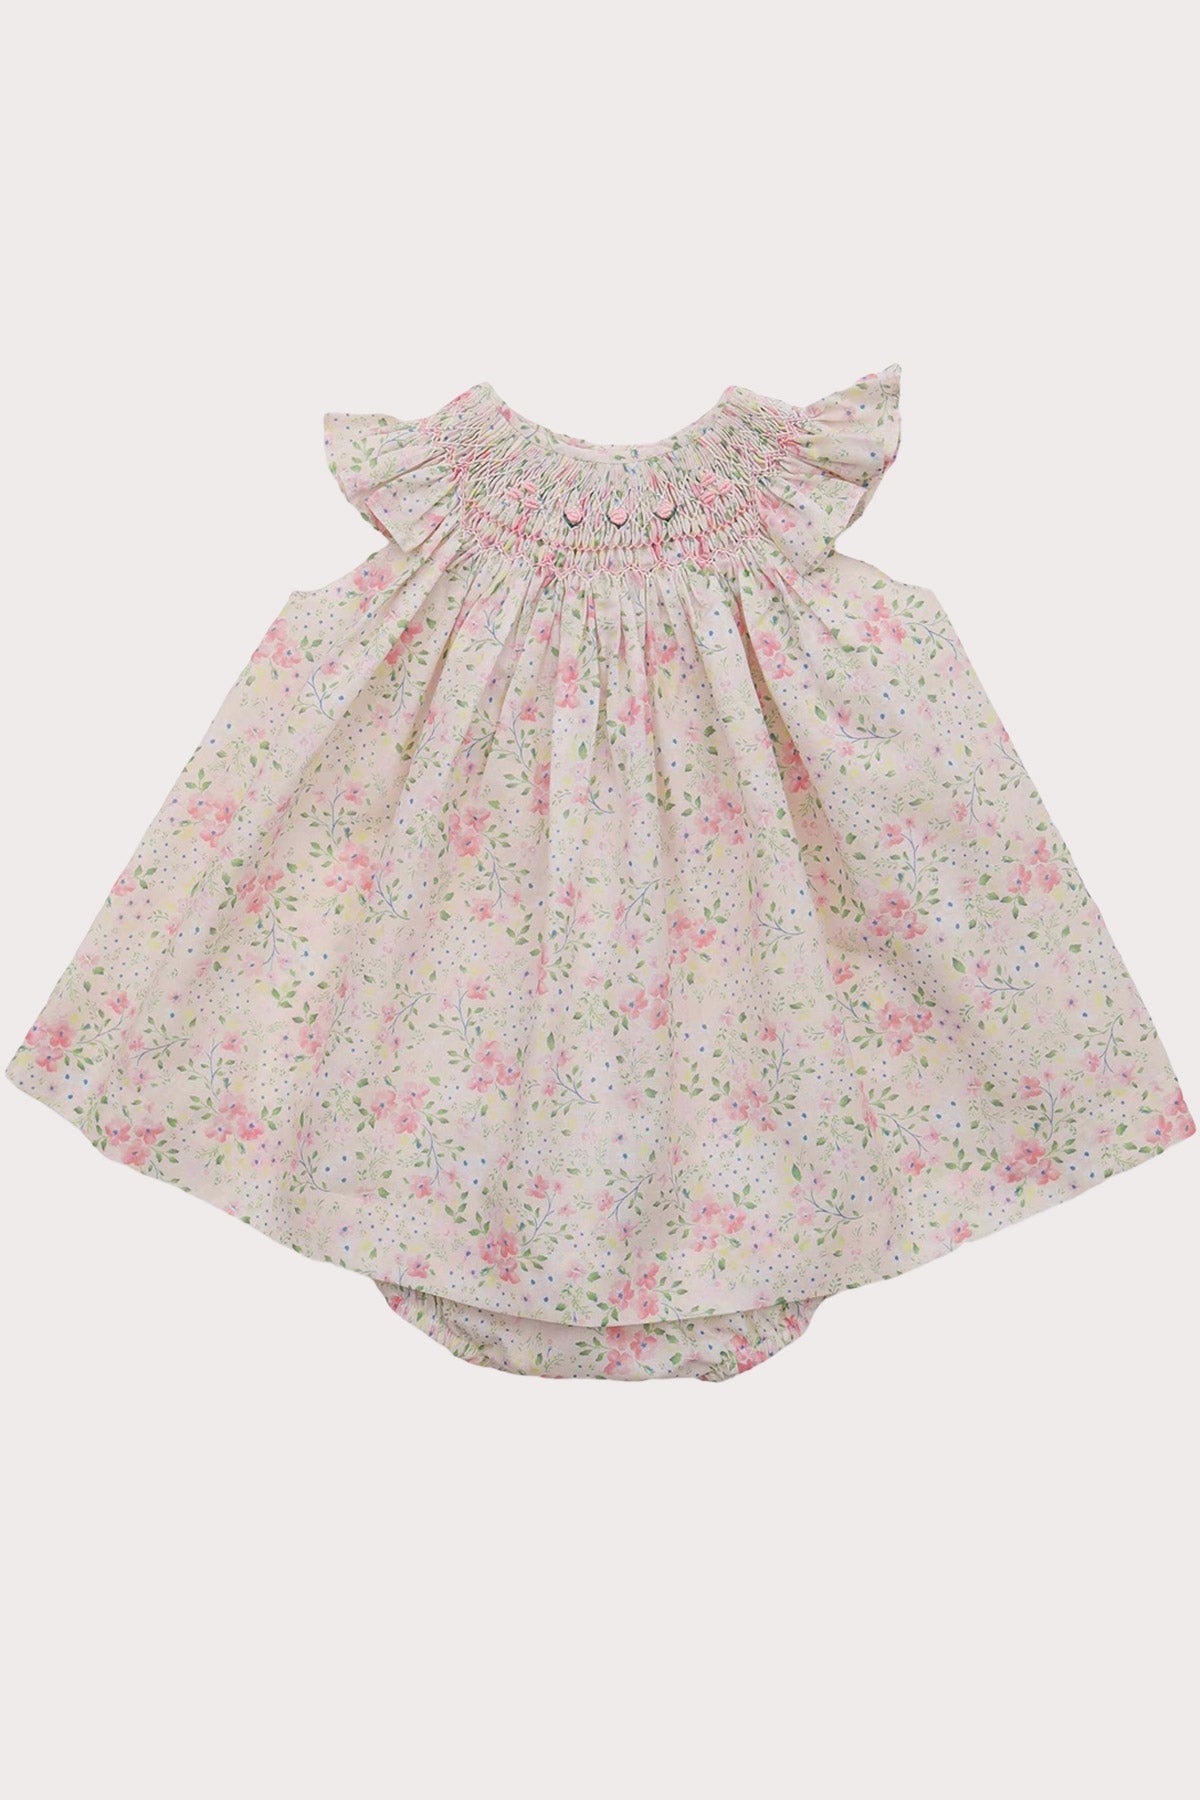 spanish hand smocked baby girl outfit